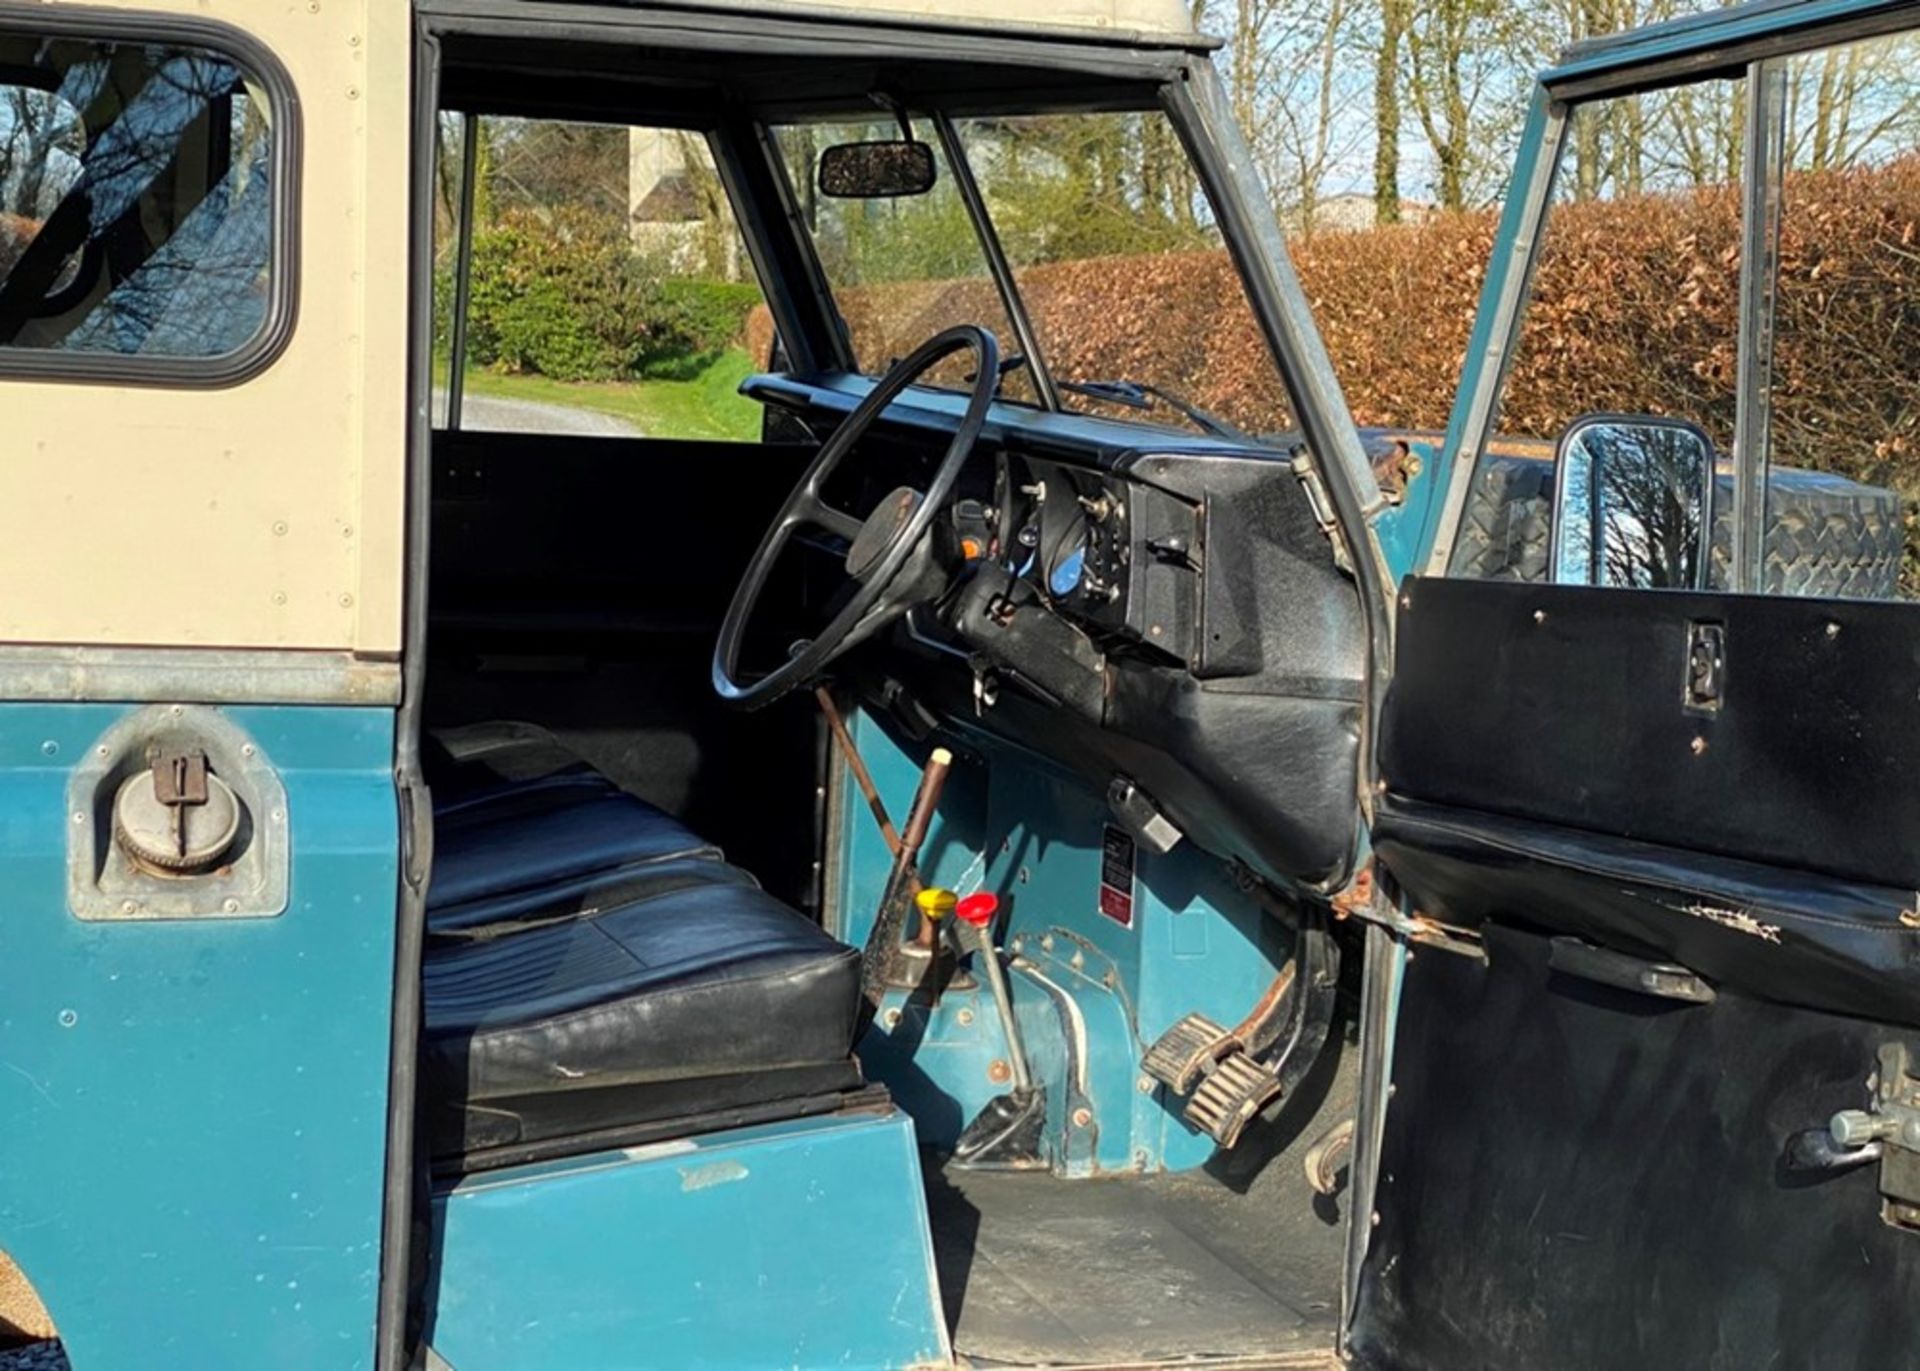 1984 Land Rover Series III - Image 3 of 9